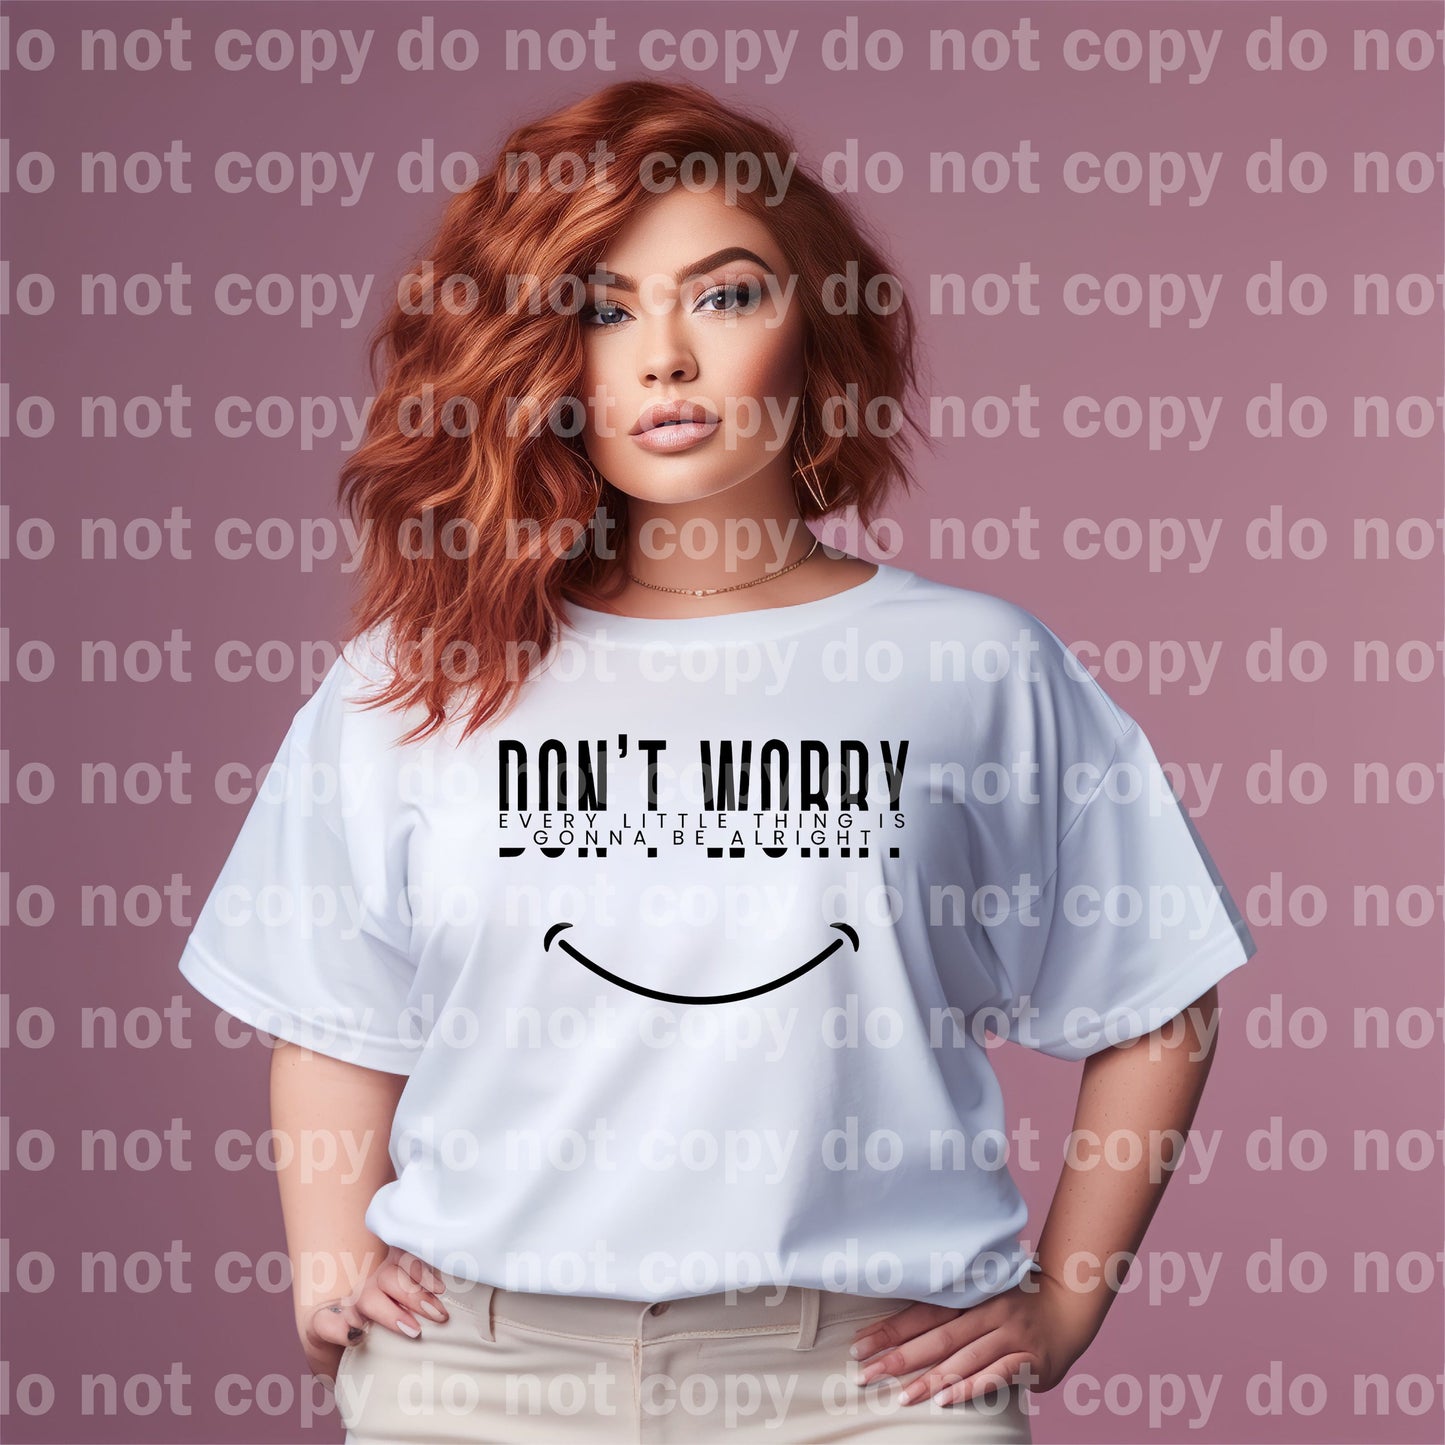 Don't Worry Every Little Thing Is Gonna Be Alright Black/White Dream Print or Sublimation Print